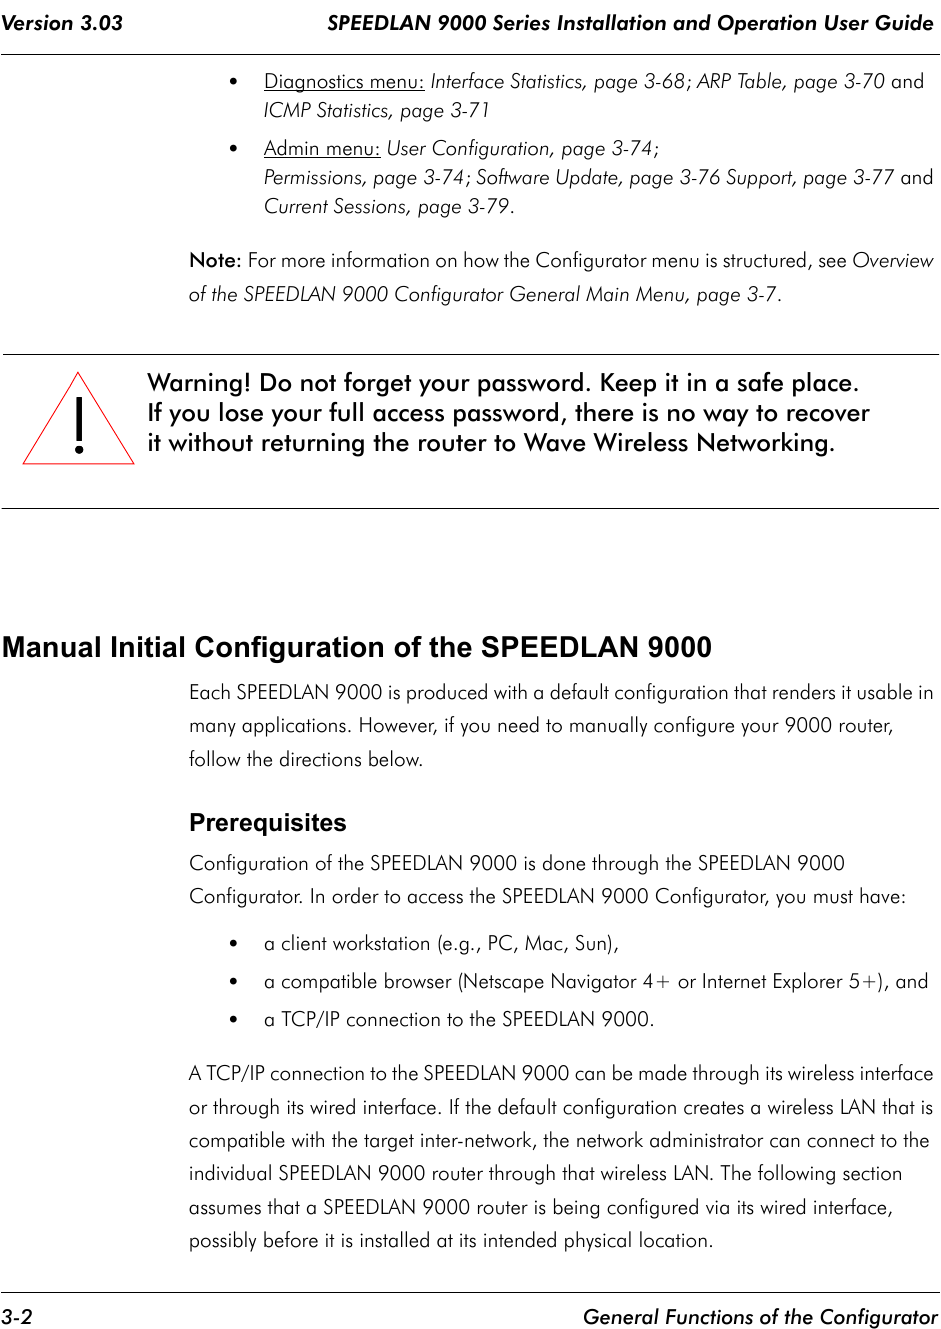 Version 3.03                                 SPEEDLAN 9000 Series Installation and Operation User Guide 3-2 General Functions of the Configurator•Diagnostics menu: Interface Statistics, page 3-68; ARP Table, page 3-70 and ICMP Statistics, page 3-71•Admin menu: User Configuration, page 3-74;Permissions, page 3-74; Software Update, page 3-76 Support, page 3-77 and Current Sessions, page 3-79.Note: For more information on how the Configurator menu is structured, see Overview of the SPEEDLAN 9000 Configurator General Main Menu, page 3-7.Manual Initial Configuration of the SPEEDLAN 9000Each SPEEDLAN 9000 is produced with a default configuration that renders it usable in many applications. However, if you need to manually configure your 9000 router, follow the directions below.Prerequisites Configuration of the SPEEDLAN 9000 is done through the SPEEDLAN 9000 Configurator. In order to access the SPEEDLAN 9000 Configurator, you must have:•a client workstation (e.g., PC, Mac, Sun),•a compatible browser (Netscape Navigator 4+ or Internet Explorer 5+), and•a TCP/IP connection to the SPEEDLAN 9000.A TCP/IP connection to the SPEEDLAN 9000 can be made through its wireless interface or through its wired interface. If the default configuration creates a wireless LAN that is compatible with the target inter-network, the network administrator can connect to the individual SPEEDLAN 9000 router through that wireless LAN. The following section assumes that a SPEEDLAN 9000 router is being configured via its wired interface, possibly before it is installed at its intended physical location.!!!!Warning! Do not forget your password. Keep it in a safe place.If you lose your full access password, there is no way to recover it without returning the router to Wave Wireless Networking.             